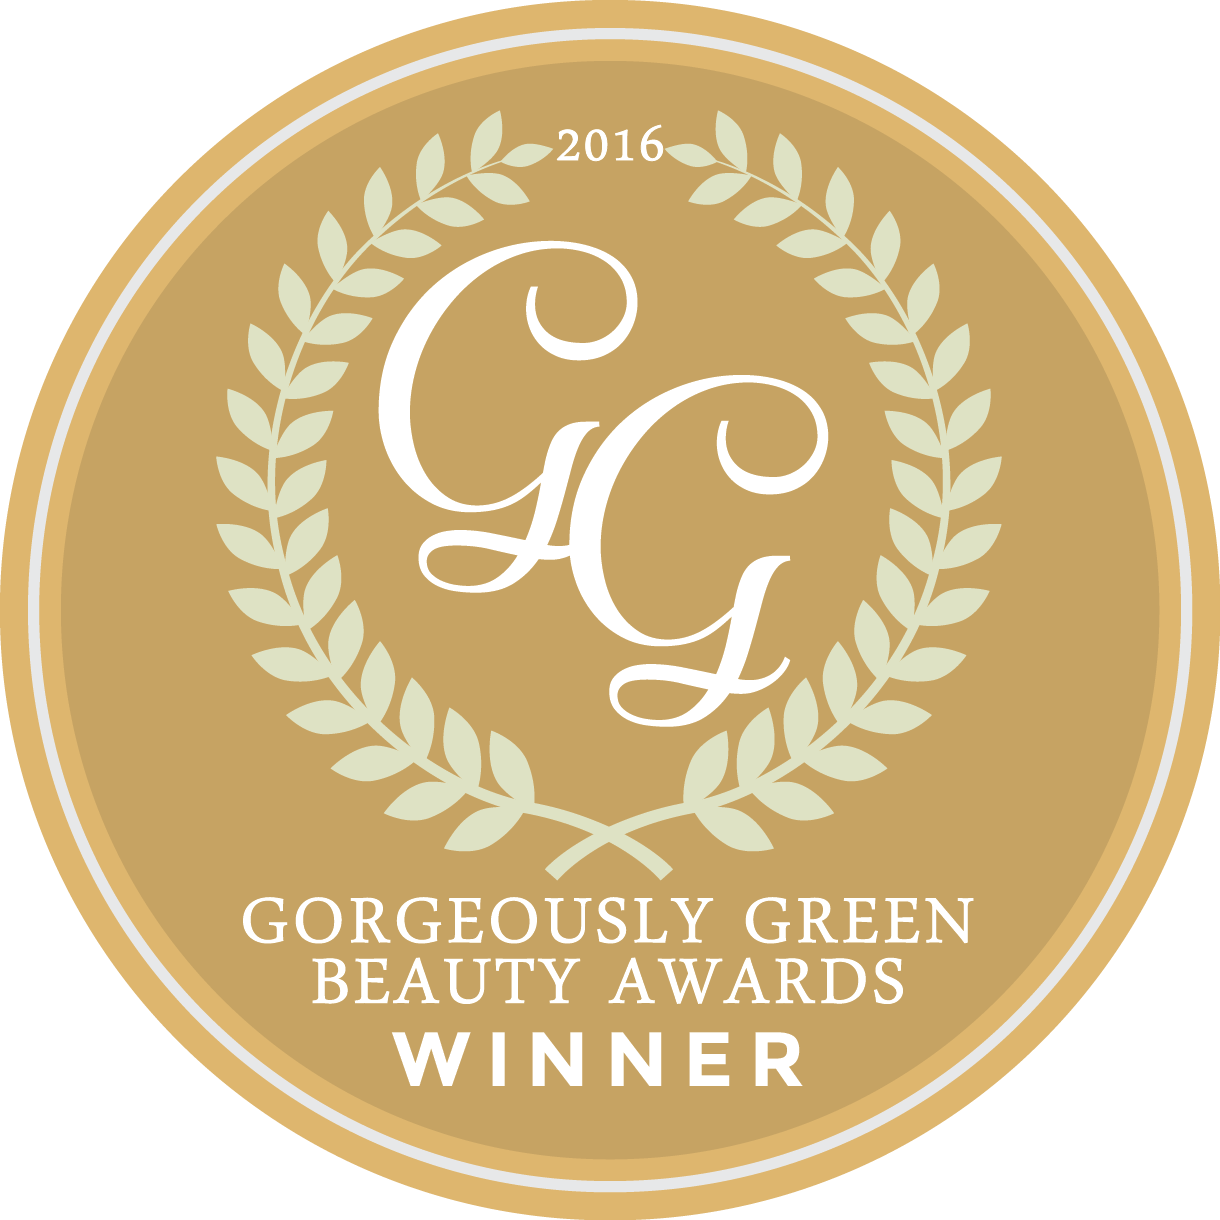 Gorgeously Green Beauty Award for Best Facial Toner from Sophie Uliano green beauty expert